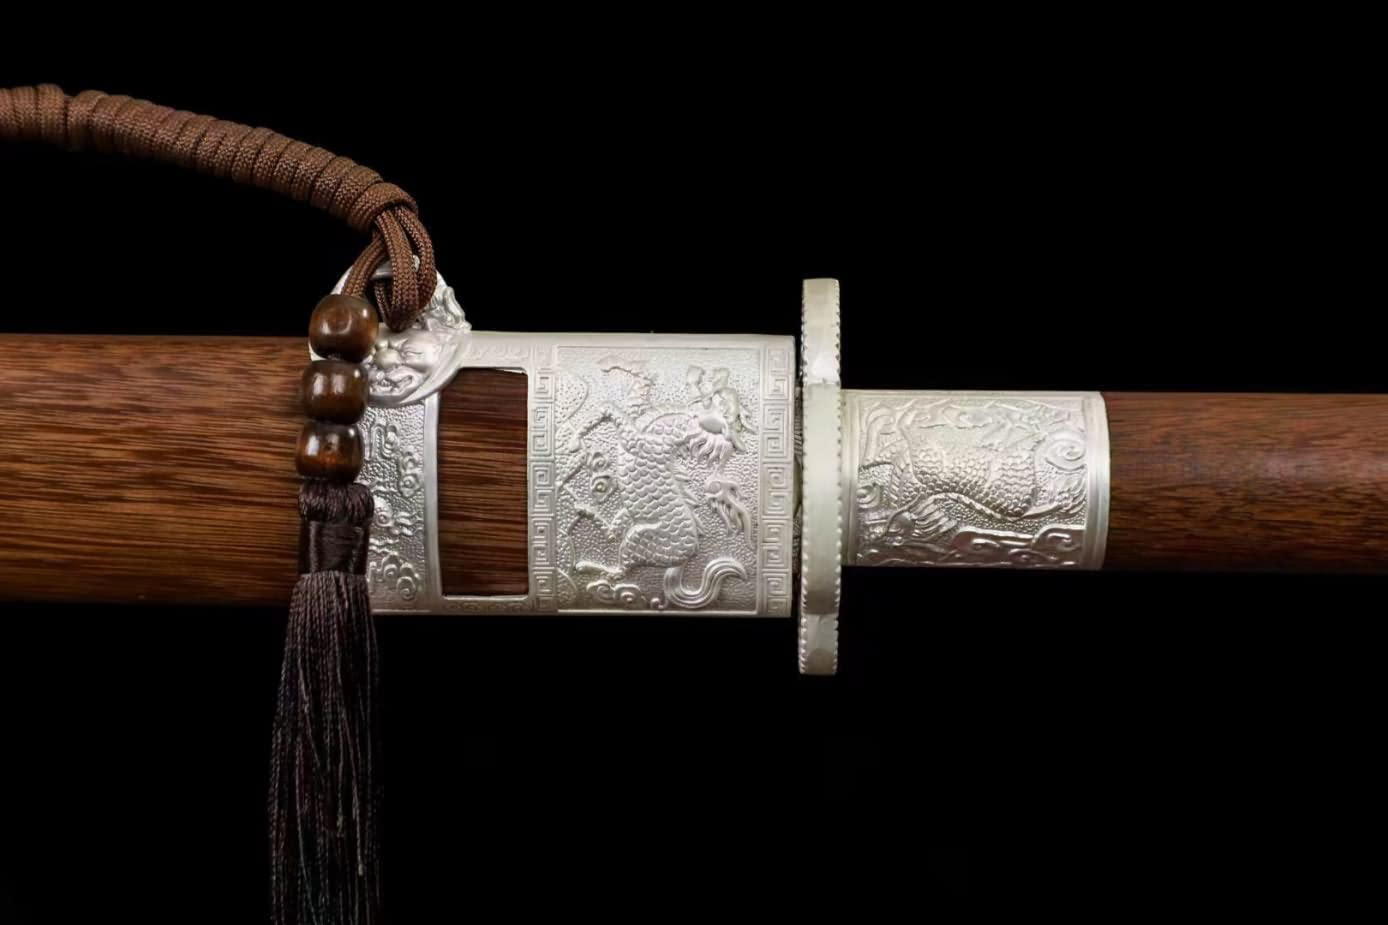 kangxi dao,Forged Etch Blade,Alloy Fittings,Rosewood Scabbard,Silver Alloy Fittings,chinese sword